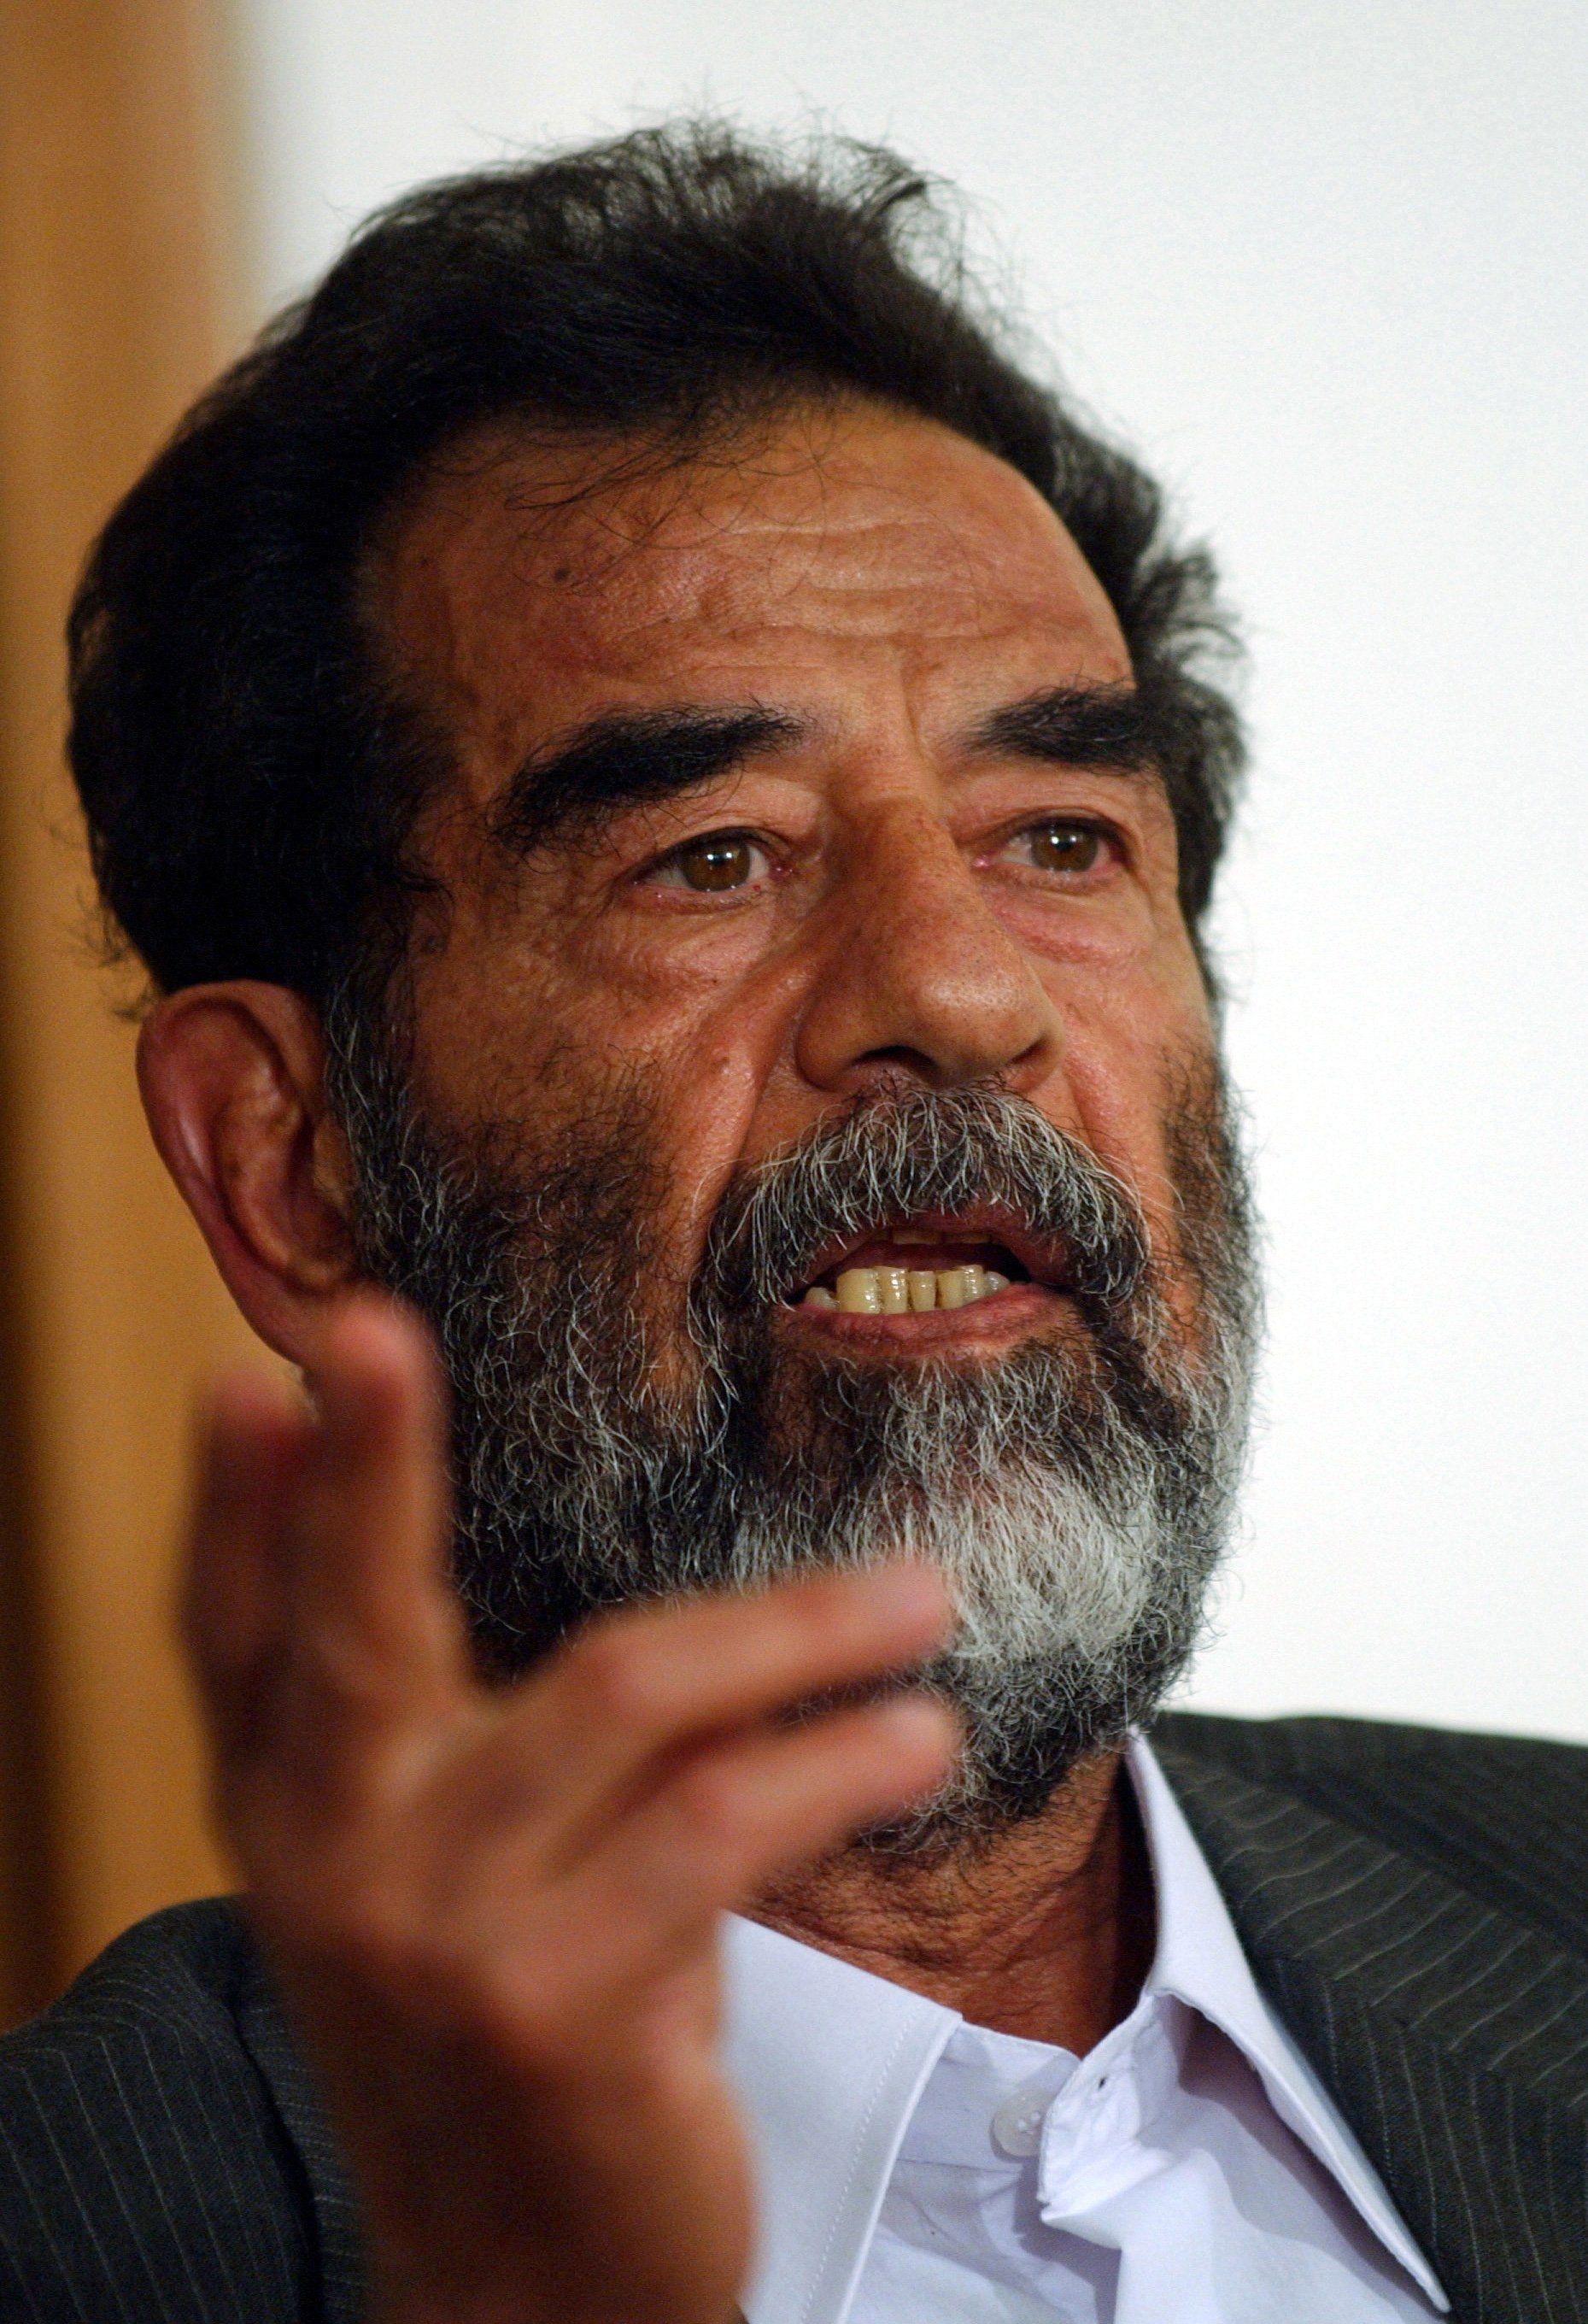 Amateur video shows the final moments of saddam